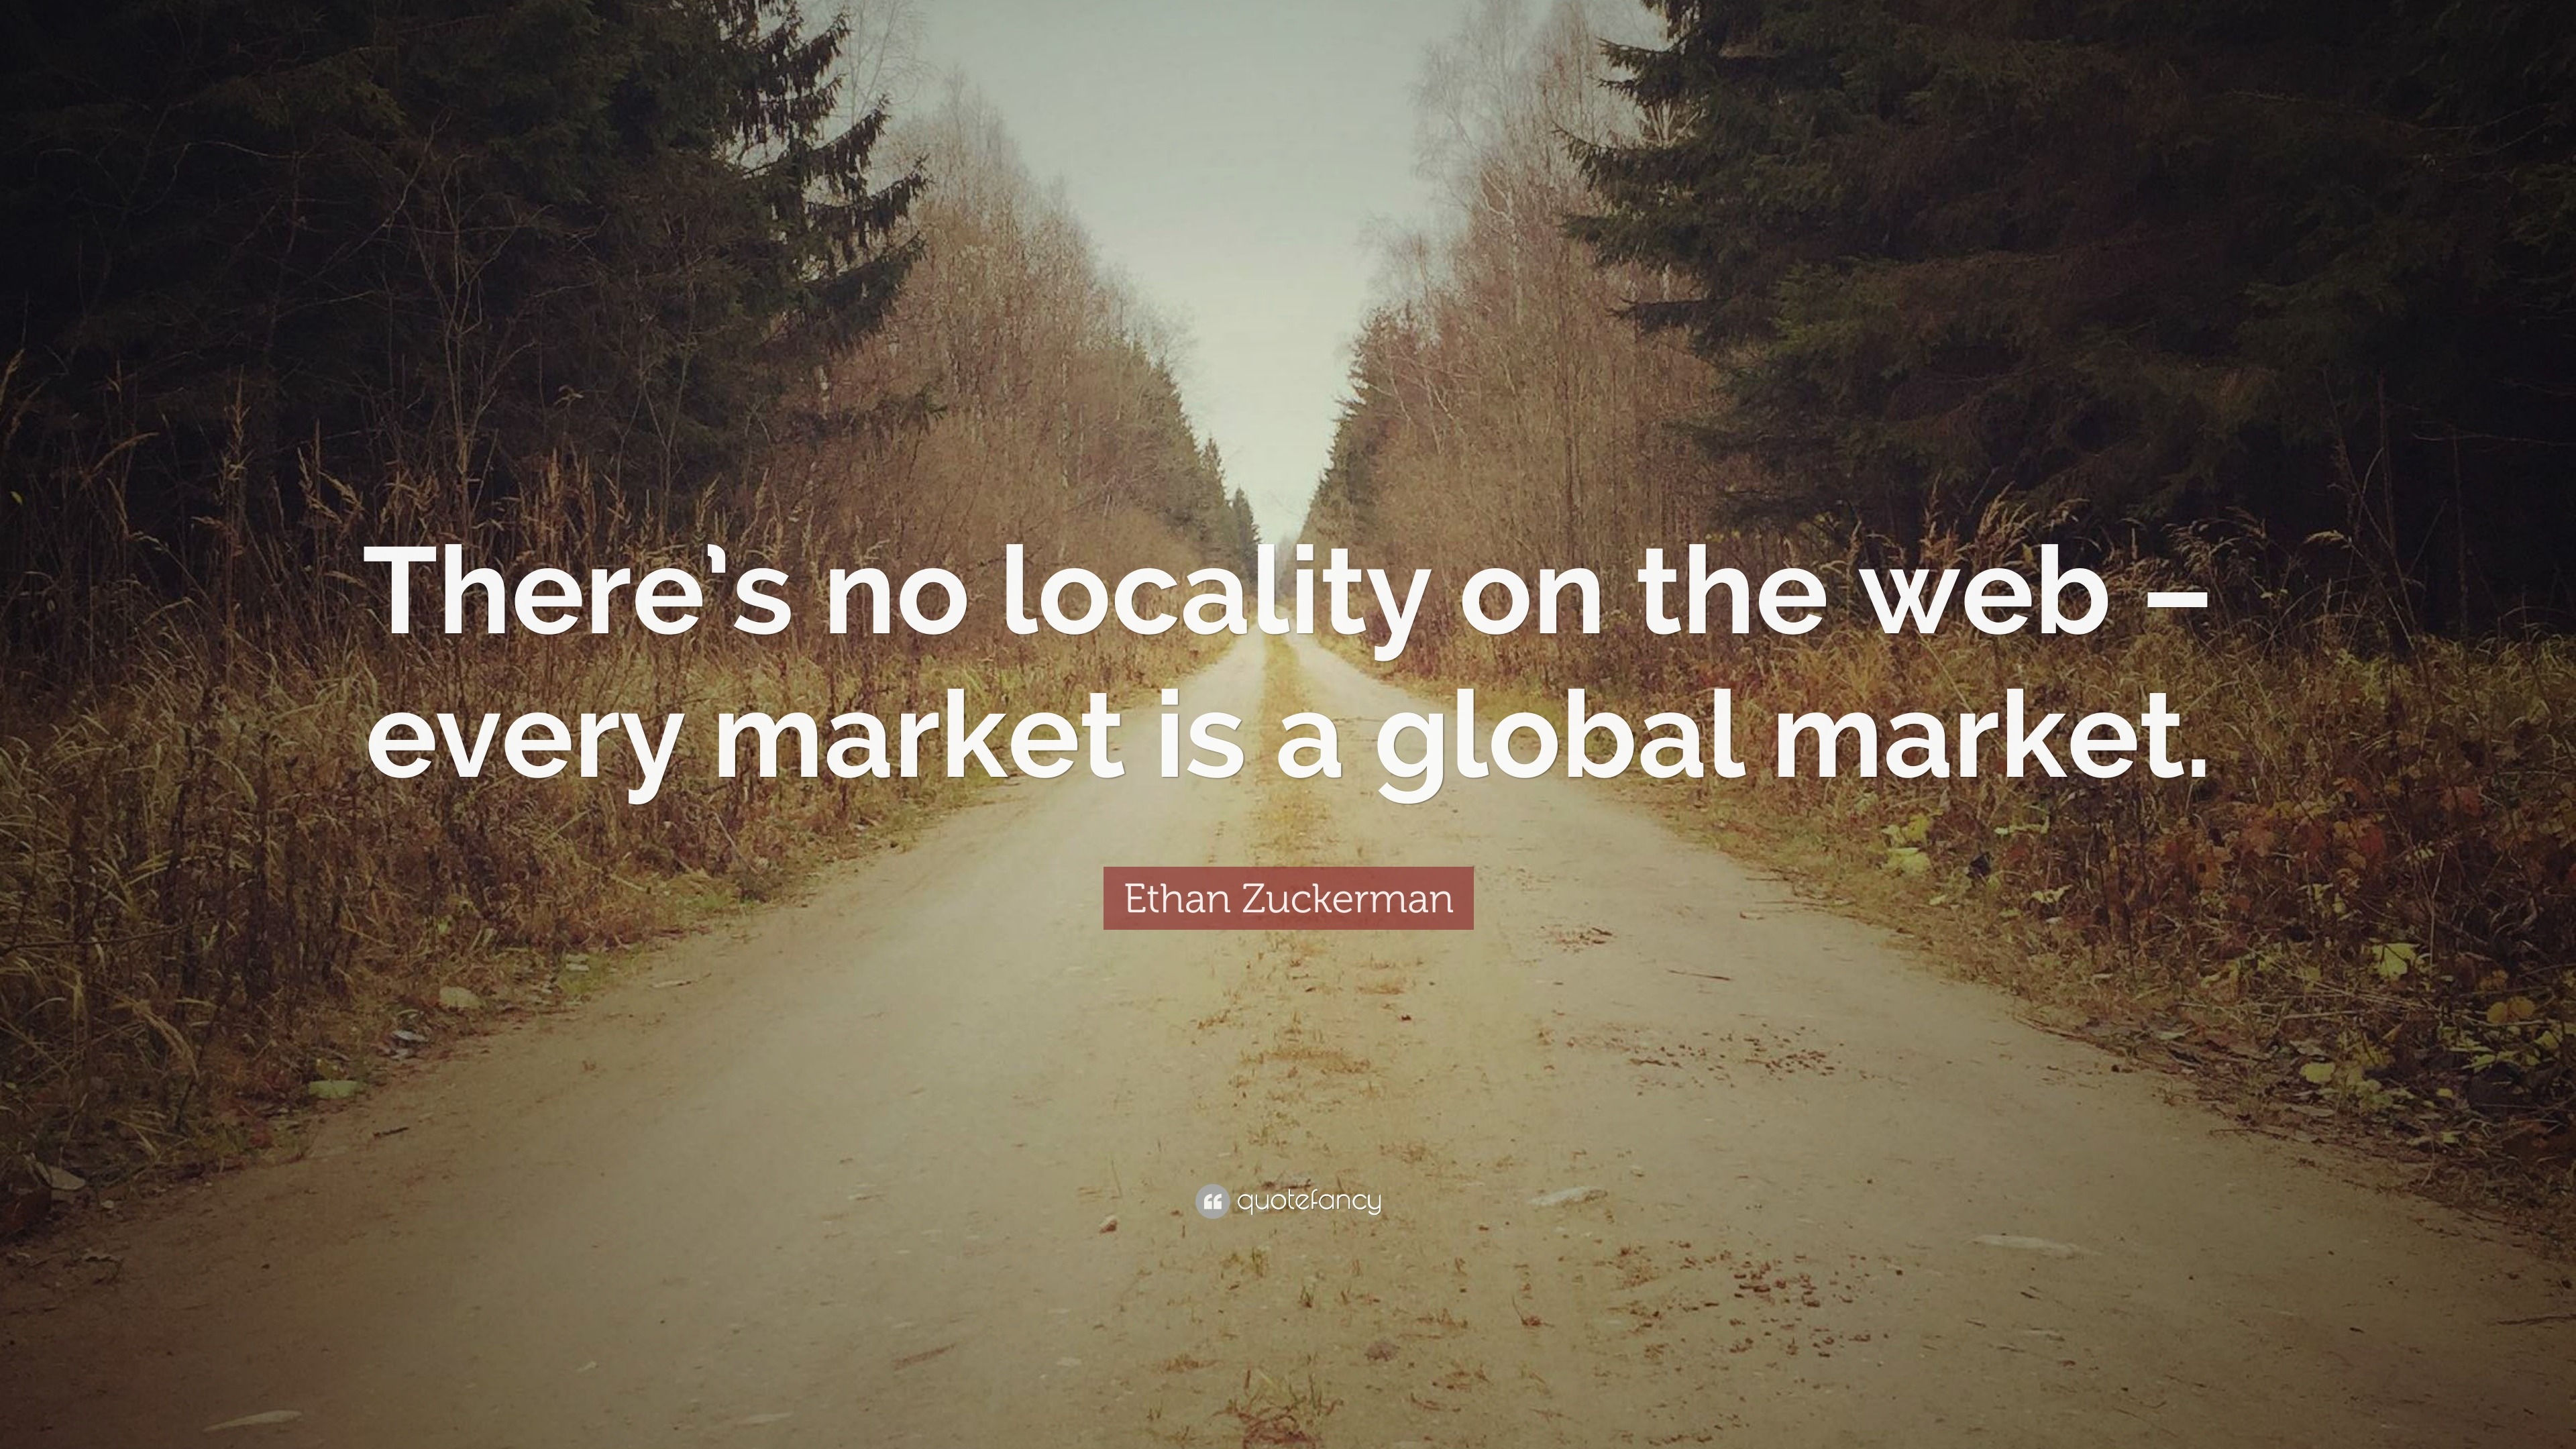 https://quotefancy.com/media/wallpaper/3840x2160/1248859-Ethan-Zuckerman-Quote-There-s-no-locality-on-the-web-every-market.jpg